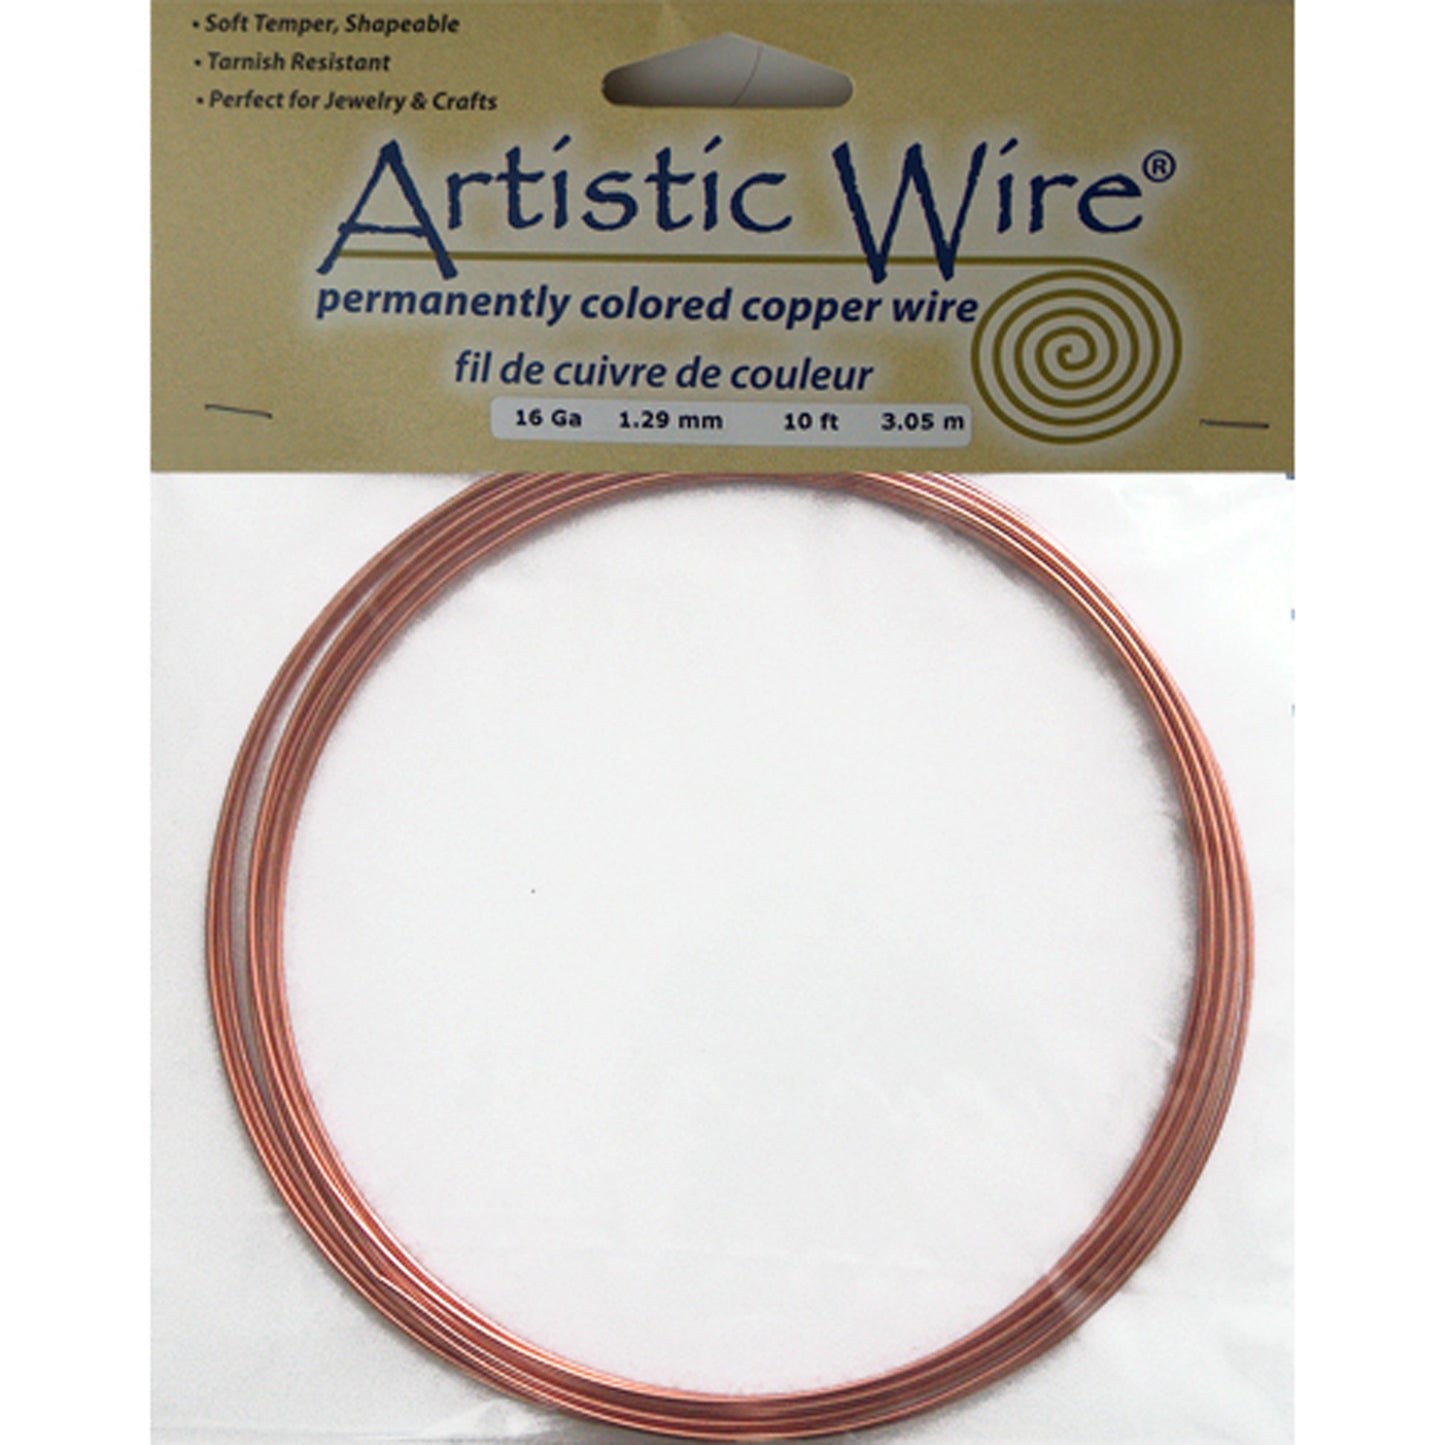 NATURAL COPPER 16 Gauge Round Wire / 10 Foot Roll / Artistic Wire